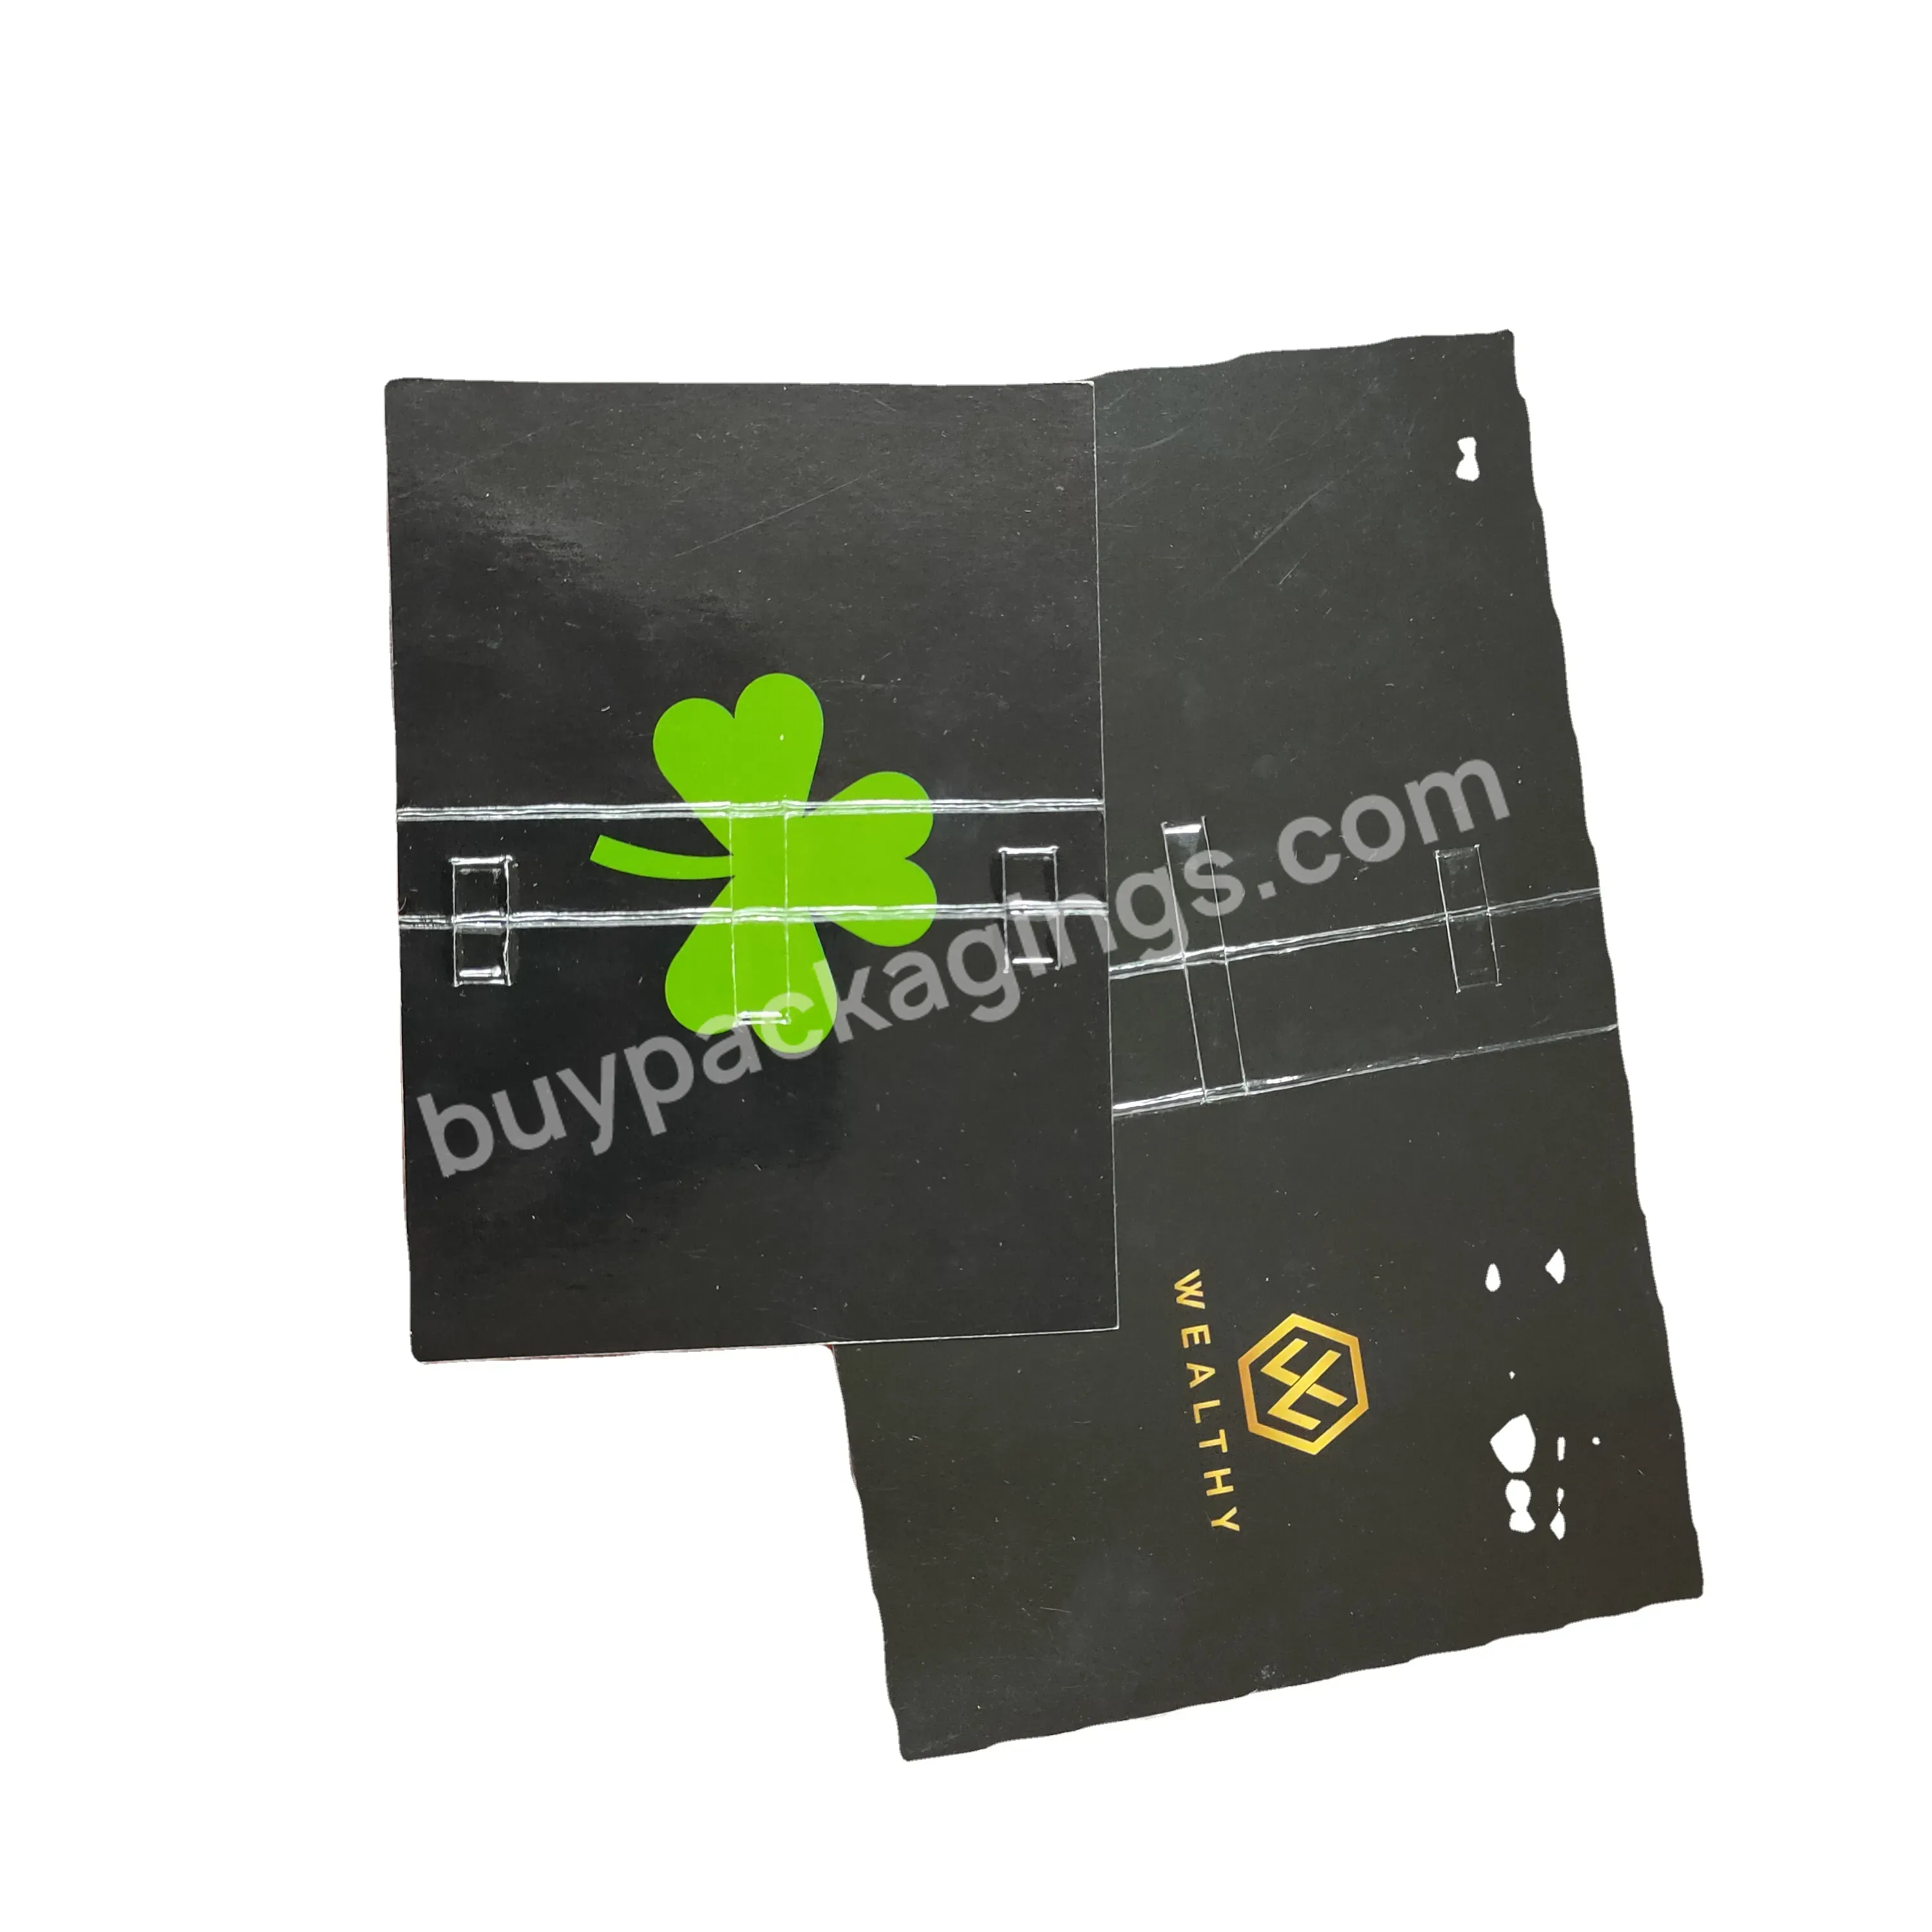 Custom High End Business Cards With Logo For Glossy Perfume Sample Cards